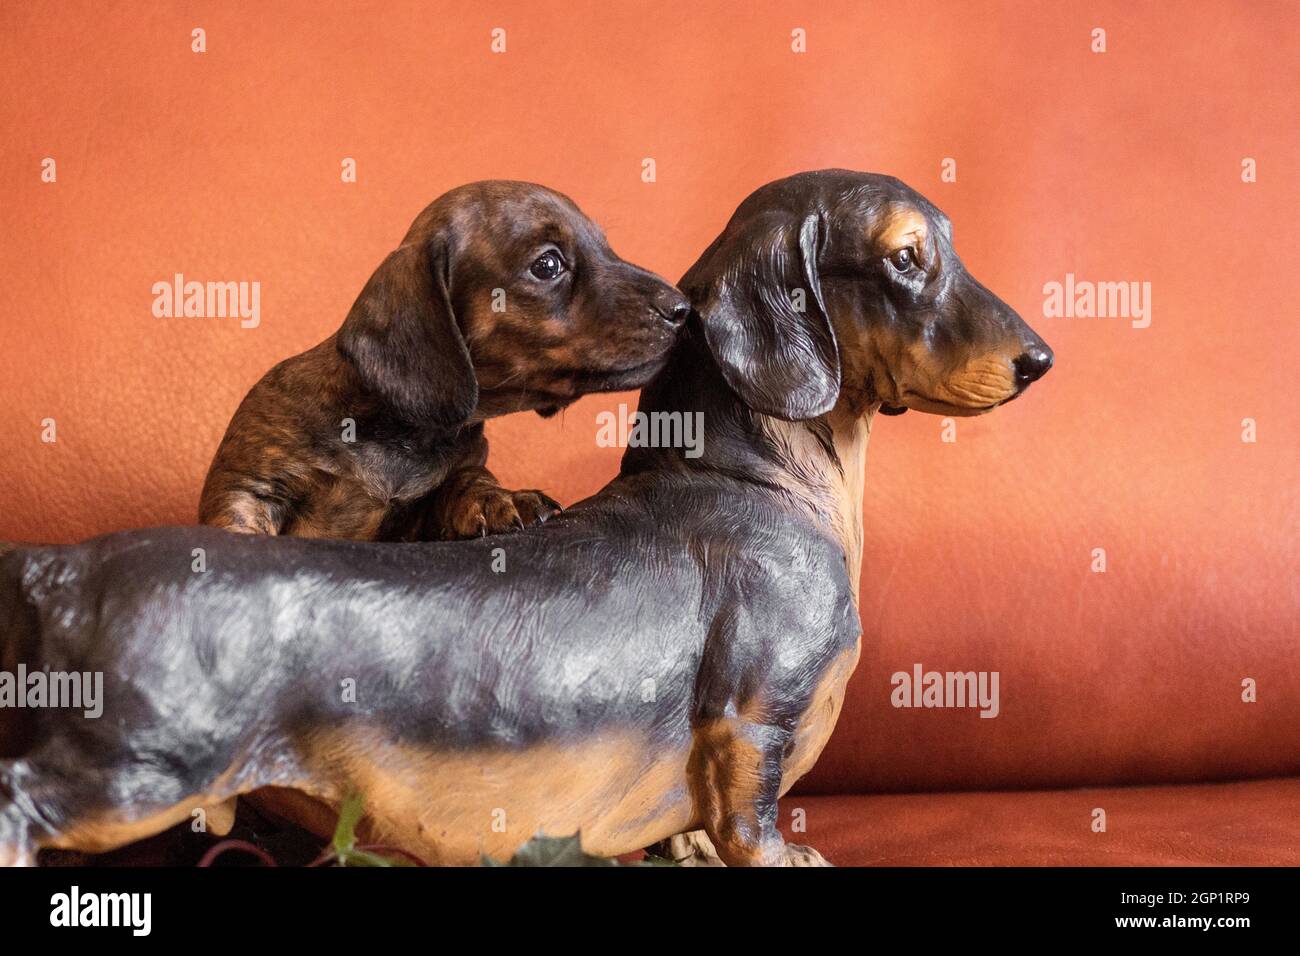 Twin dachshunds, live tan black brindle puppy and black and brown doxie figurine by orange ?ouch indoors Stock Photo